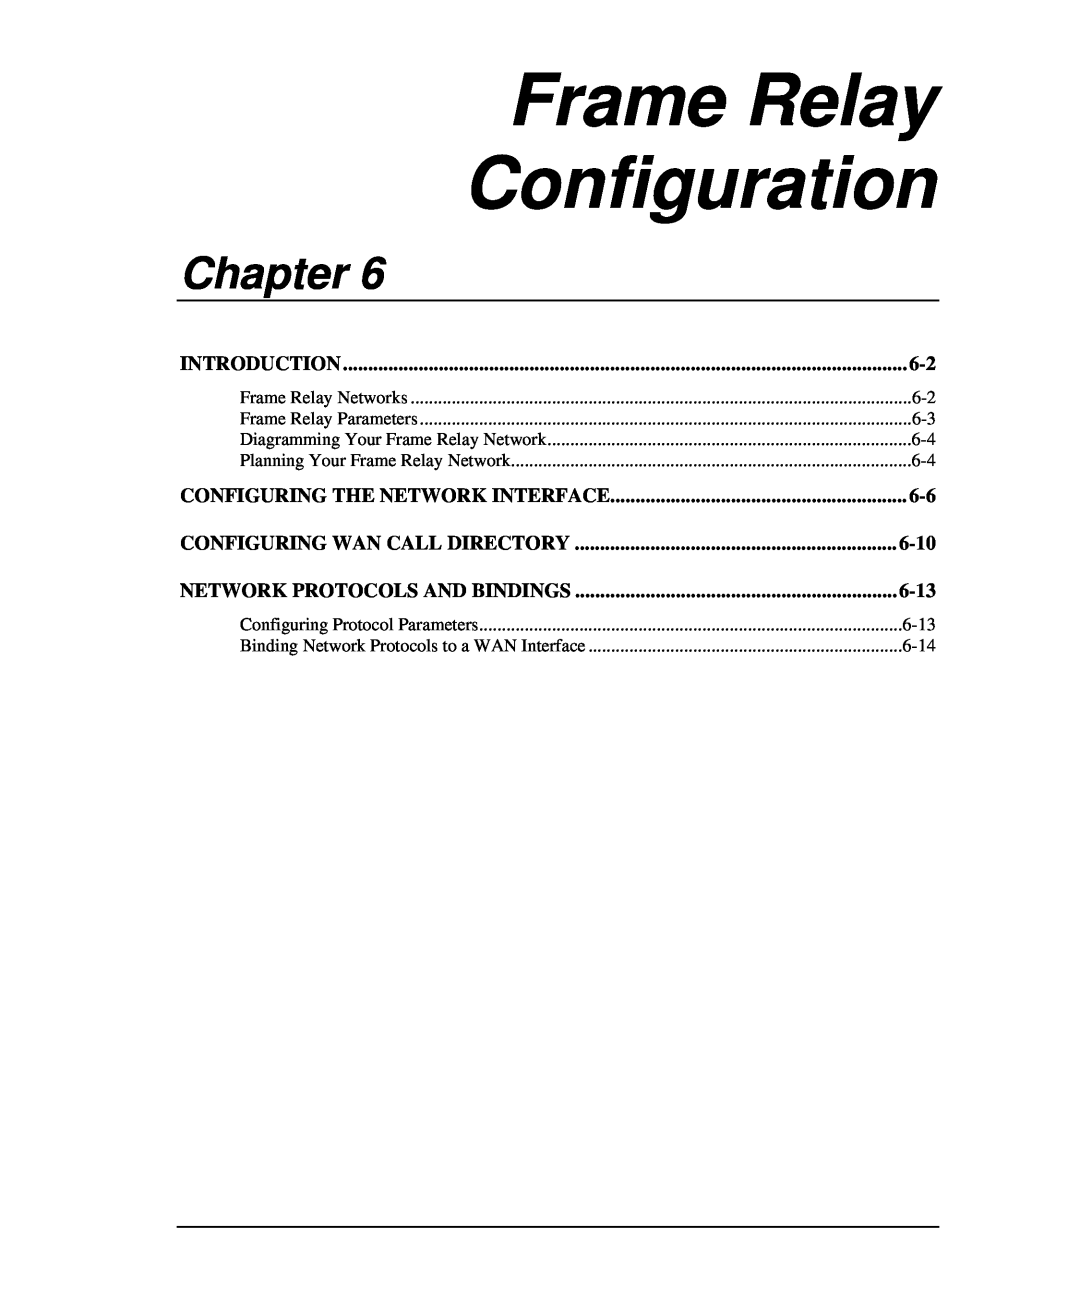 Emulex DCP_link Frame Relay Configuration, Chapter, Introduction, Configuring The Network Interface, 6-10, 6-13, 6-14 